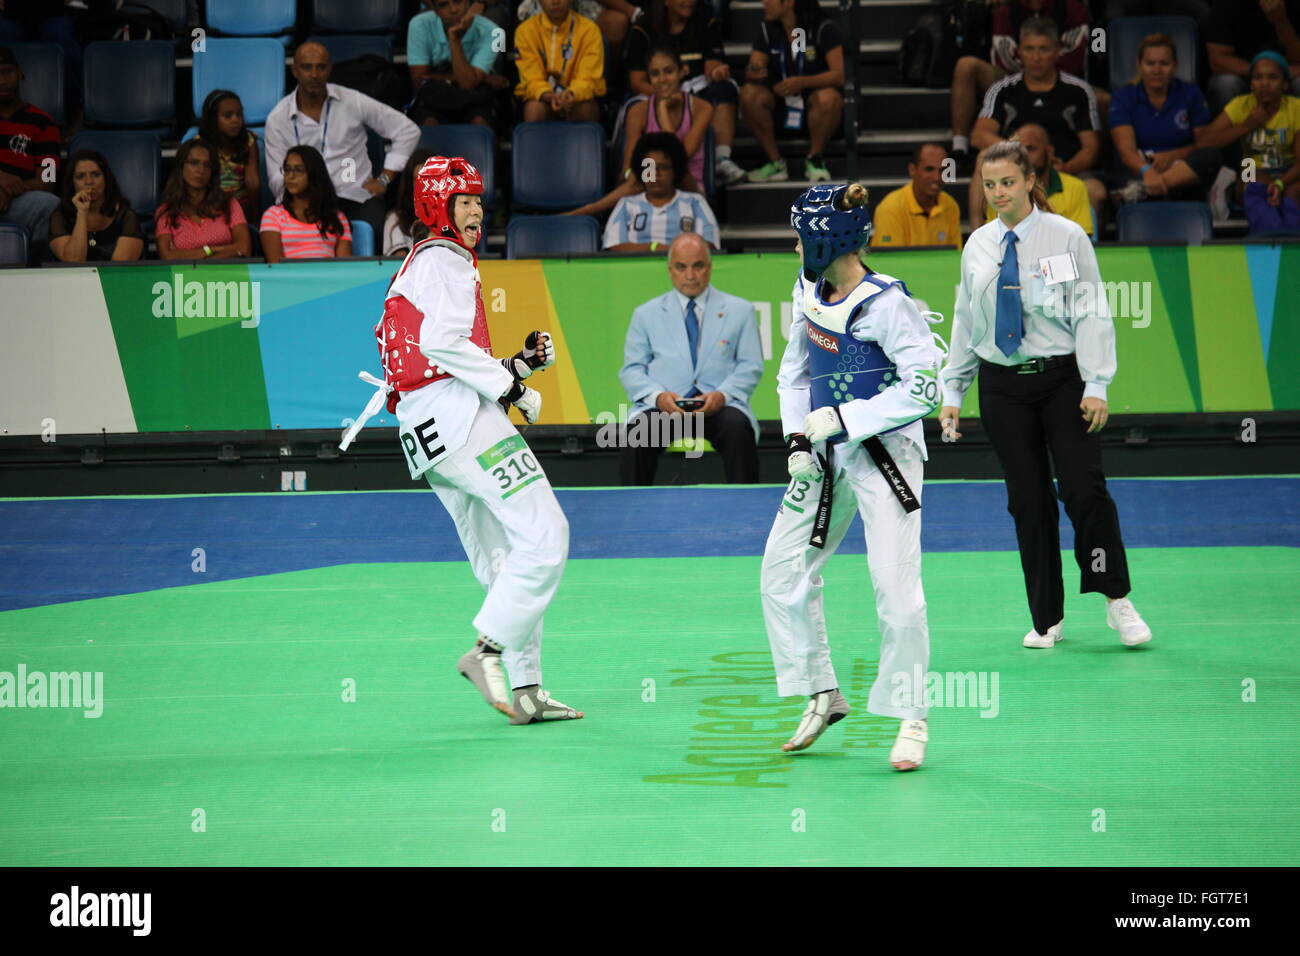 Rio de Janeiro, Brazil, 21 February 2016: Rio 2016 Olympic Park holds a test event for Rio 2016 Olympic Games. The International Taekwondo Tournament meets 64 athletes from 15 countries. Among the athletes participating in the competition are: Iris Tang Sing, Rafaela Ahmad, João Miguel Neto, Leonardo de Moraes and Andre Bilia, from Brazil, Rui Bragança from Portugal anda Mayu Yama from Japan. In this photo are the Evelyn Gonda from Canada and Chuang Chen Yu from Chinese Taipei Credit:  Luiz Souza/Alamy Live News Stock Photo